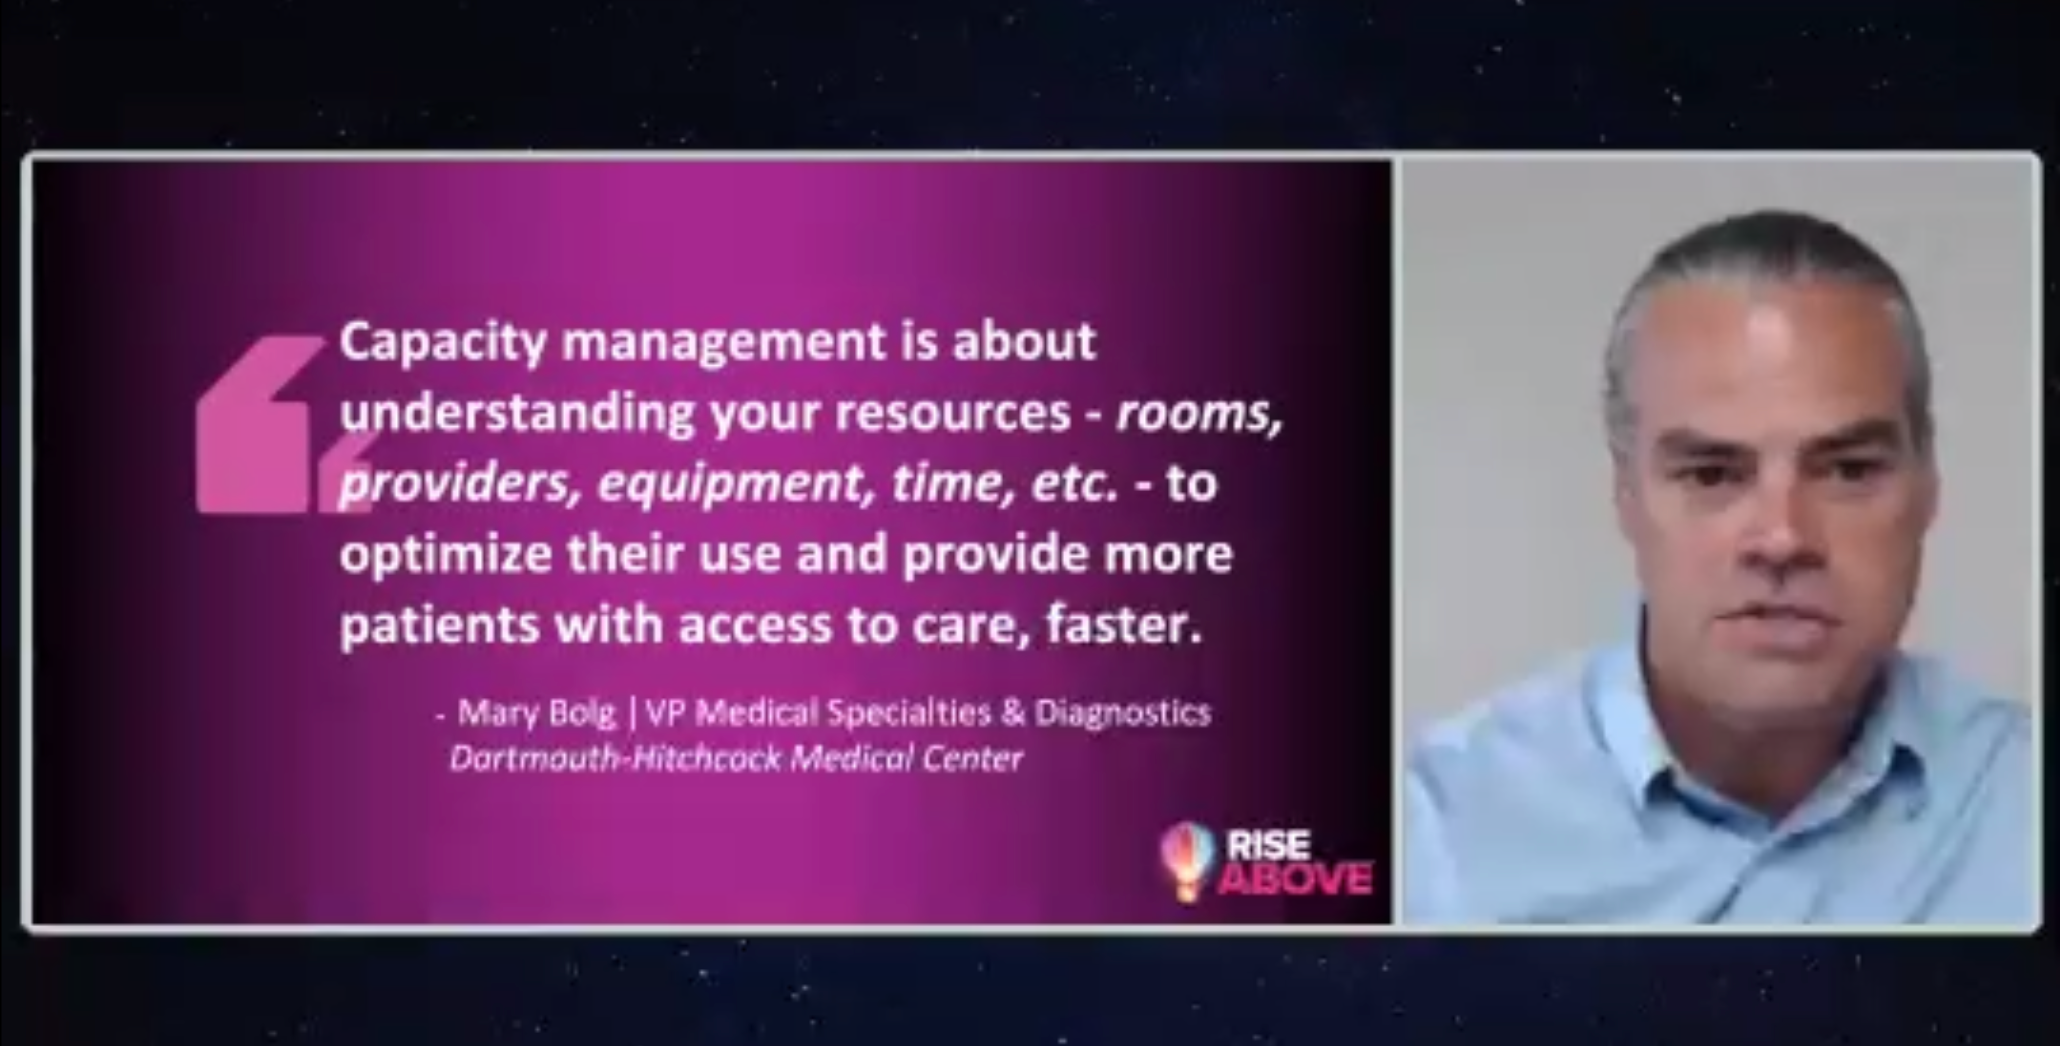 MGMA 2020: Using technology to manage capacity in the time of COVID-19